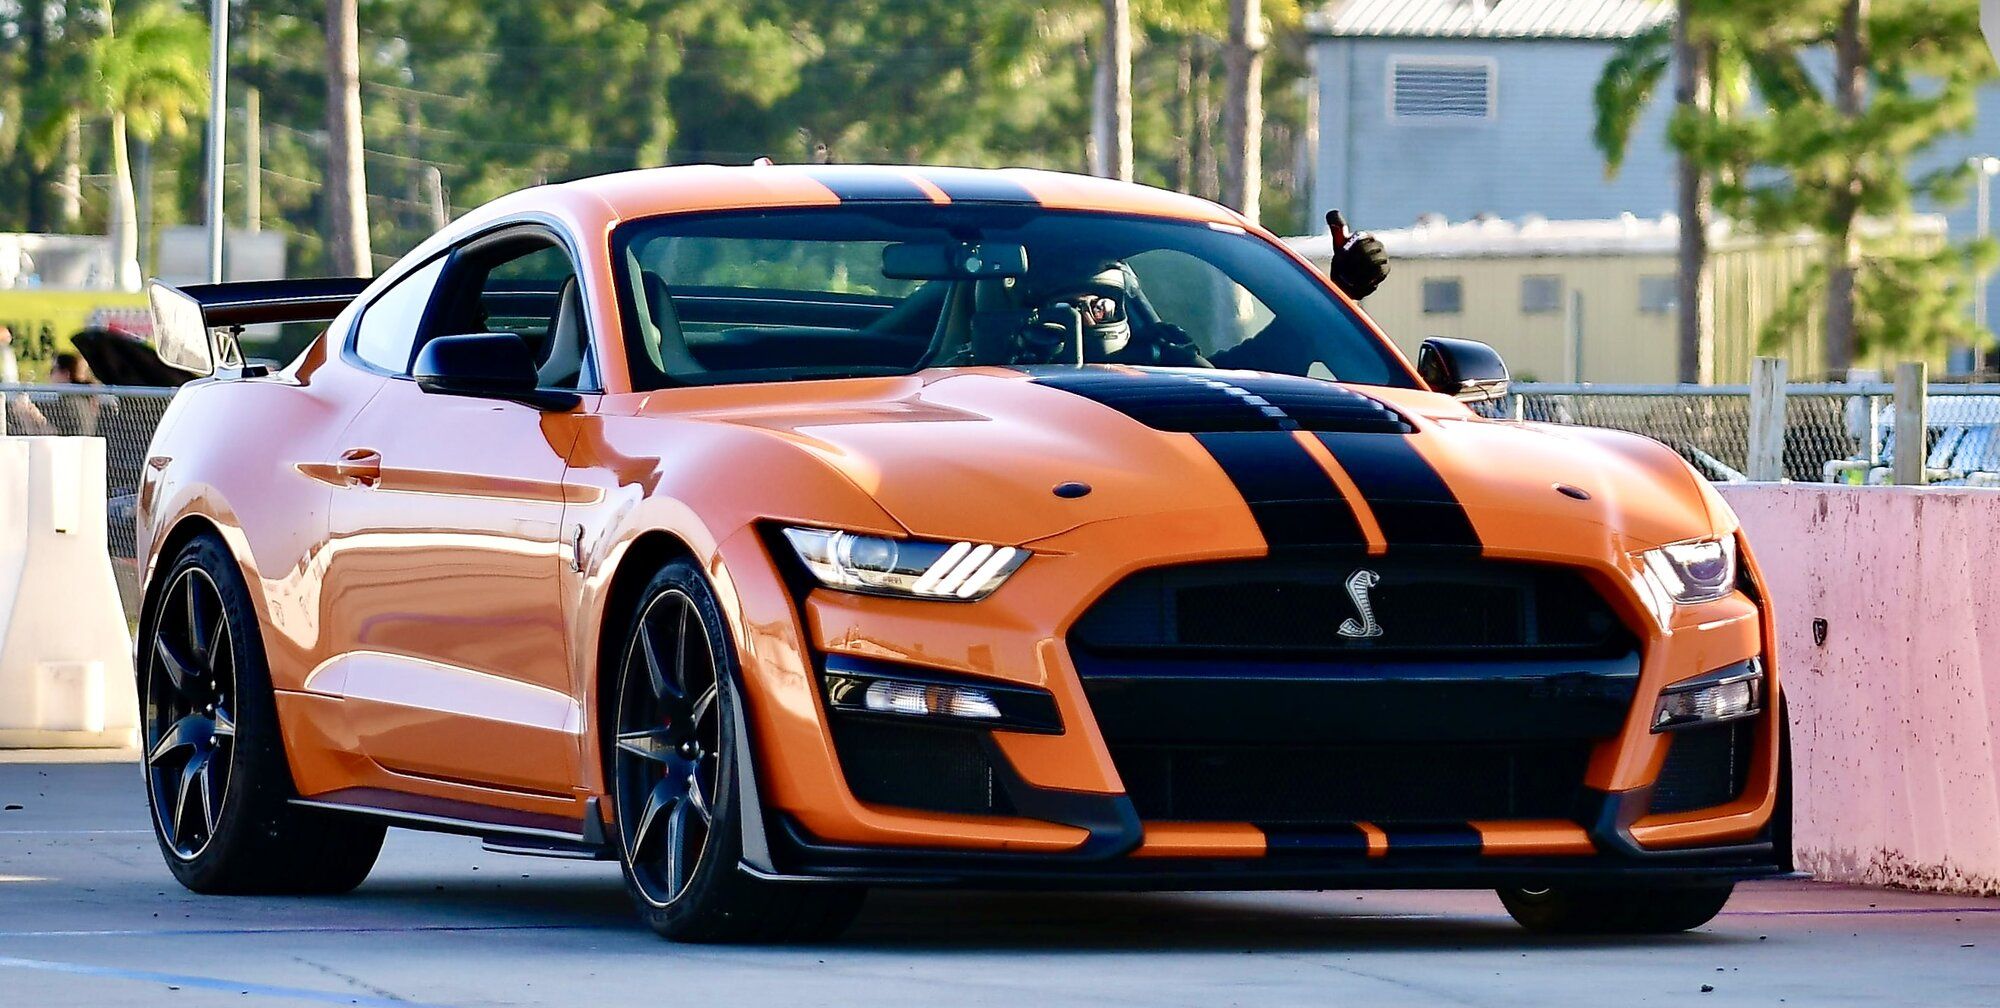 2021 Mustang
GT500 HPDE/Track -  (Speak Loudly and Carry a Big Stick)